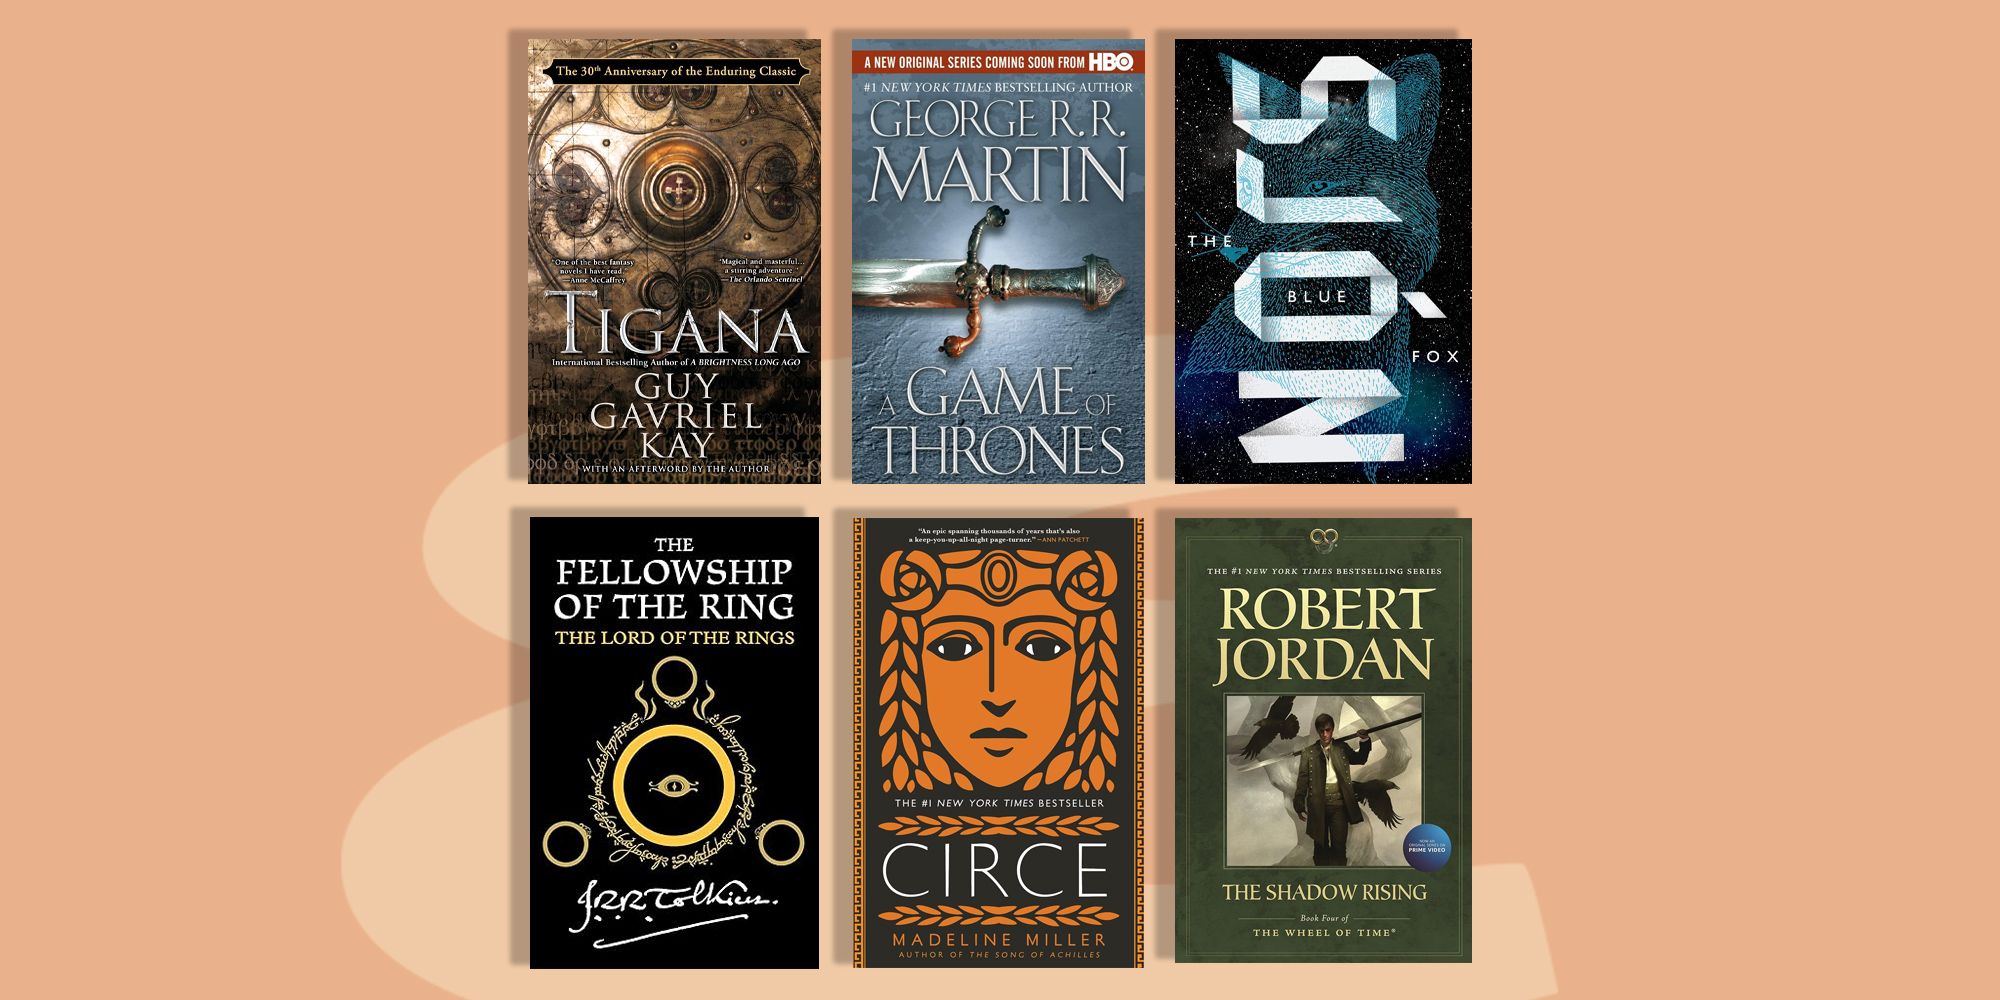 The 50 best fantasy books of all time - Pan Macmillan